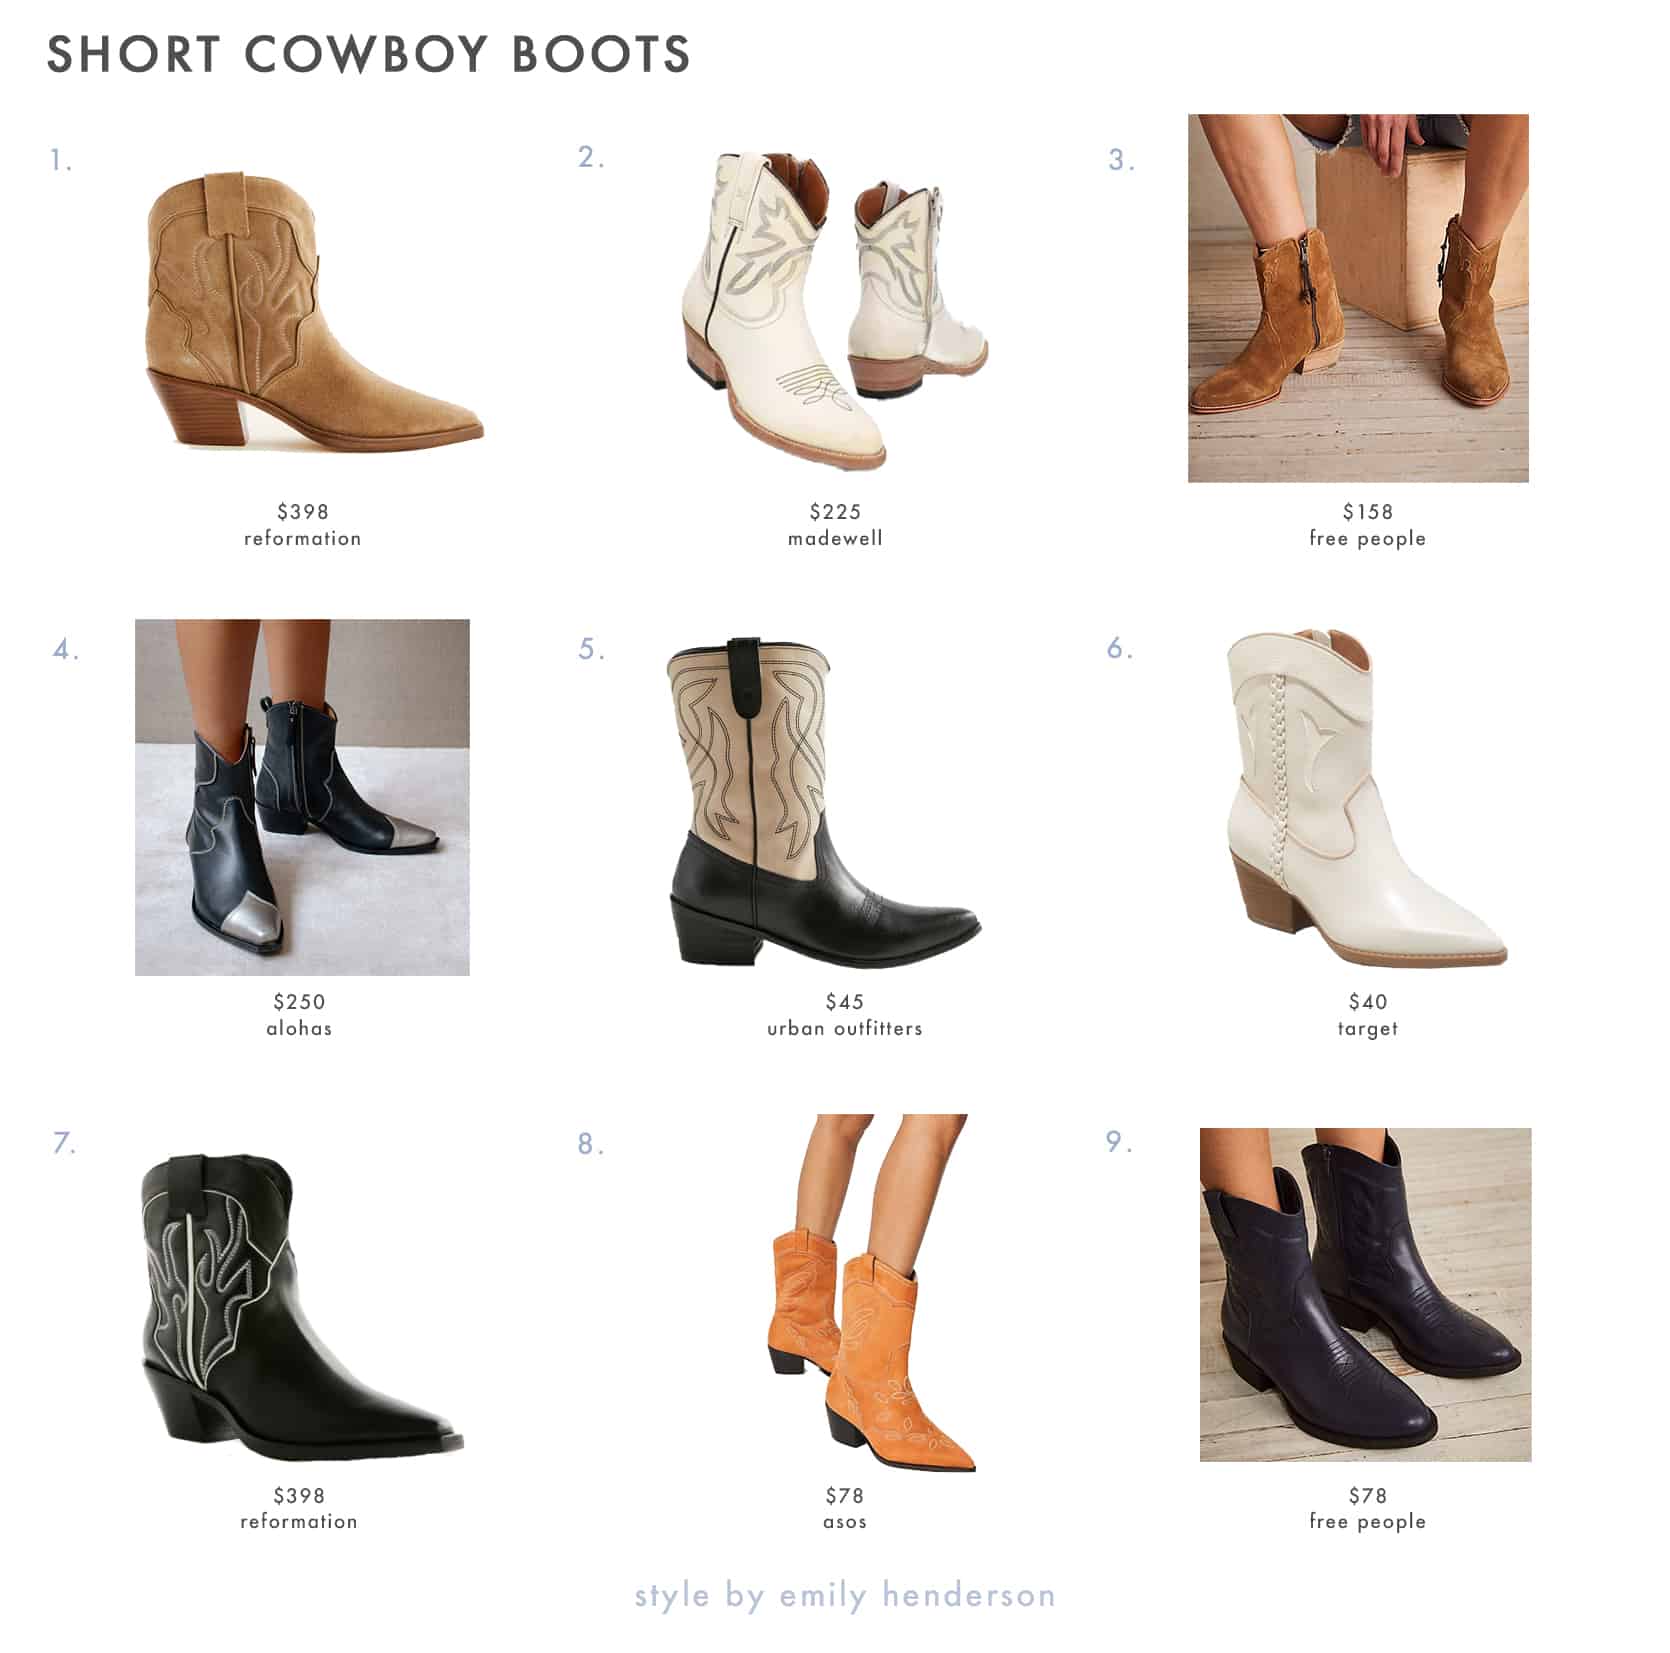 How Should I Style Cowboy Boots? - The New York Times